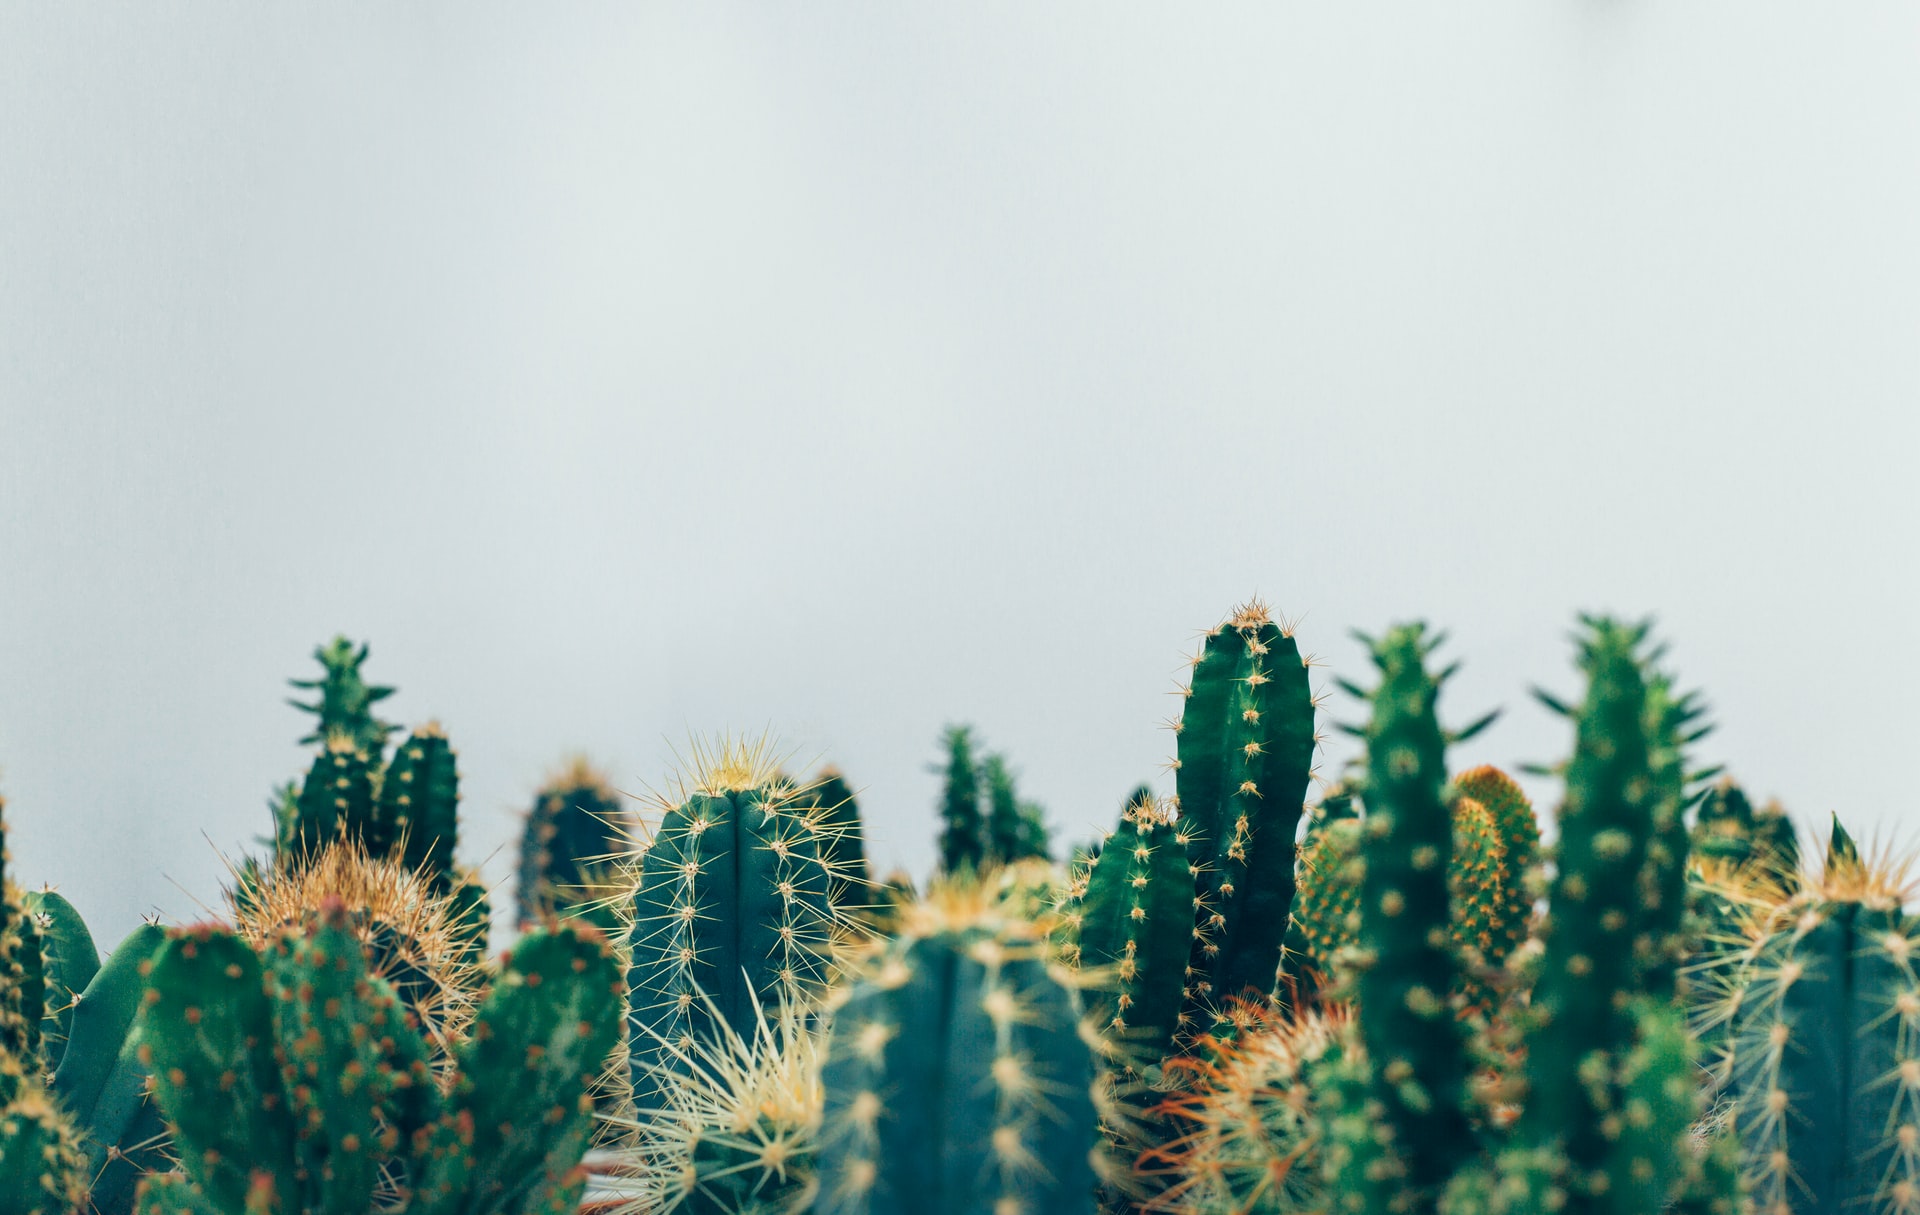 care tips to keep your mini cactus happy thomas verbruggen 5a06owu6wuc unsplash